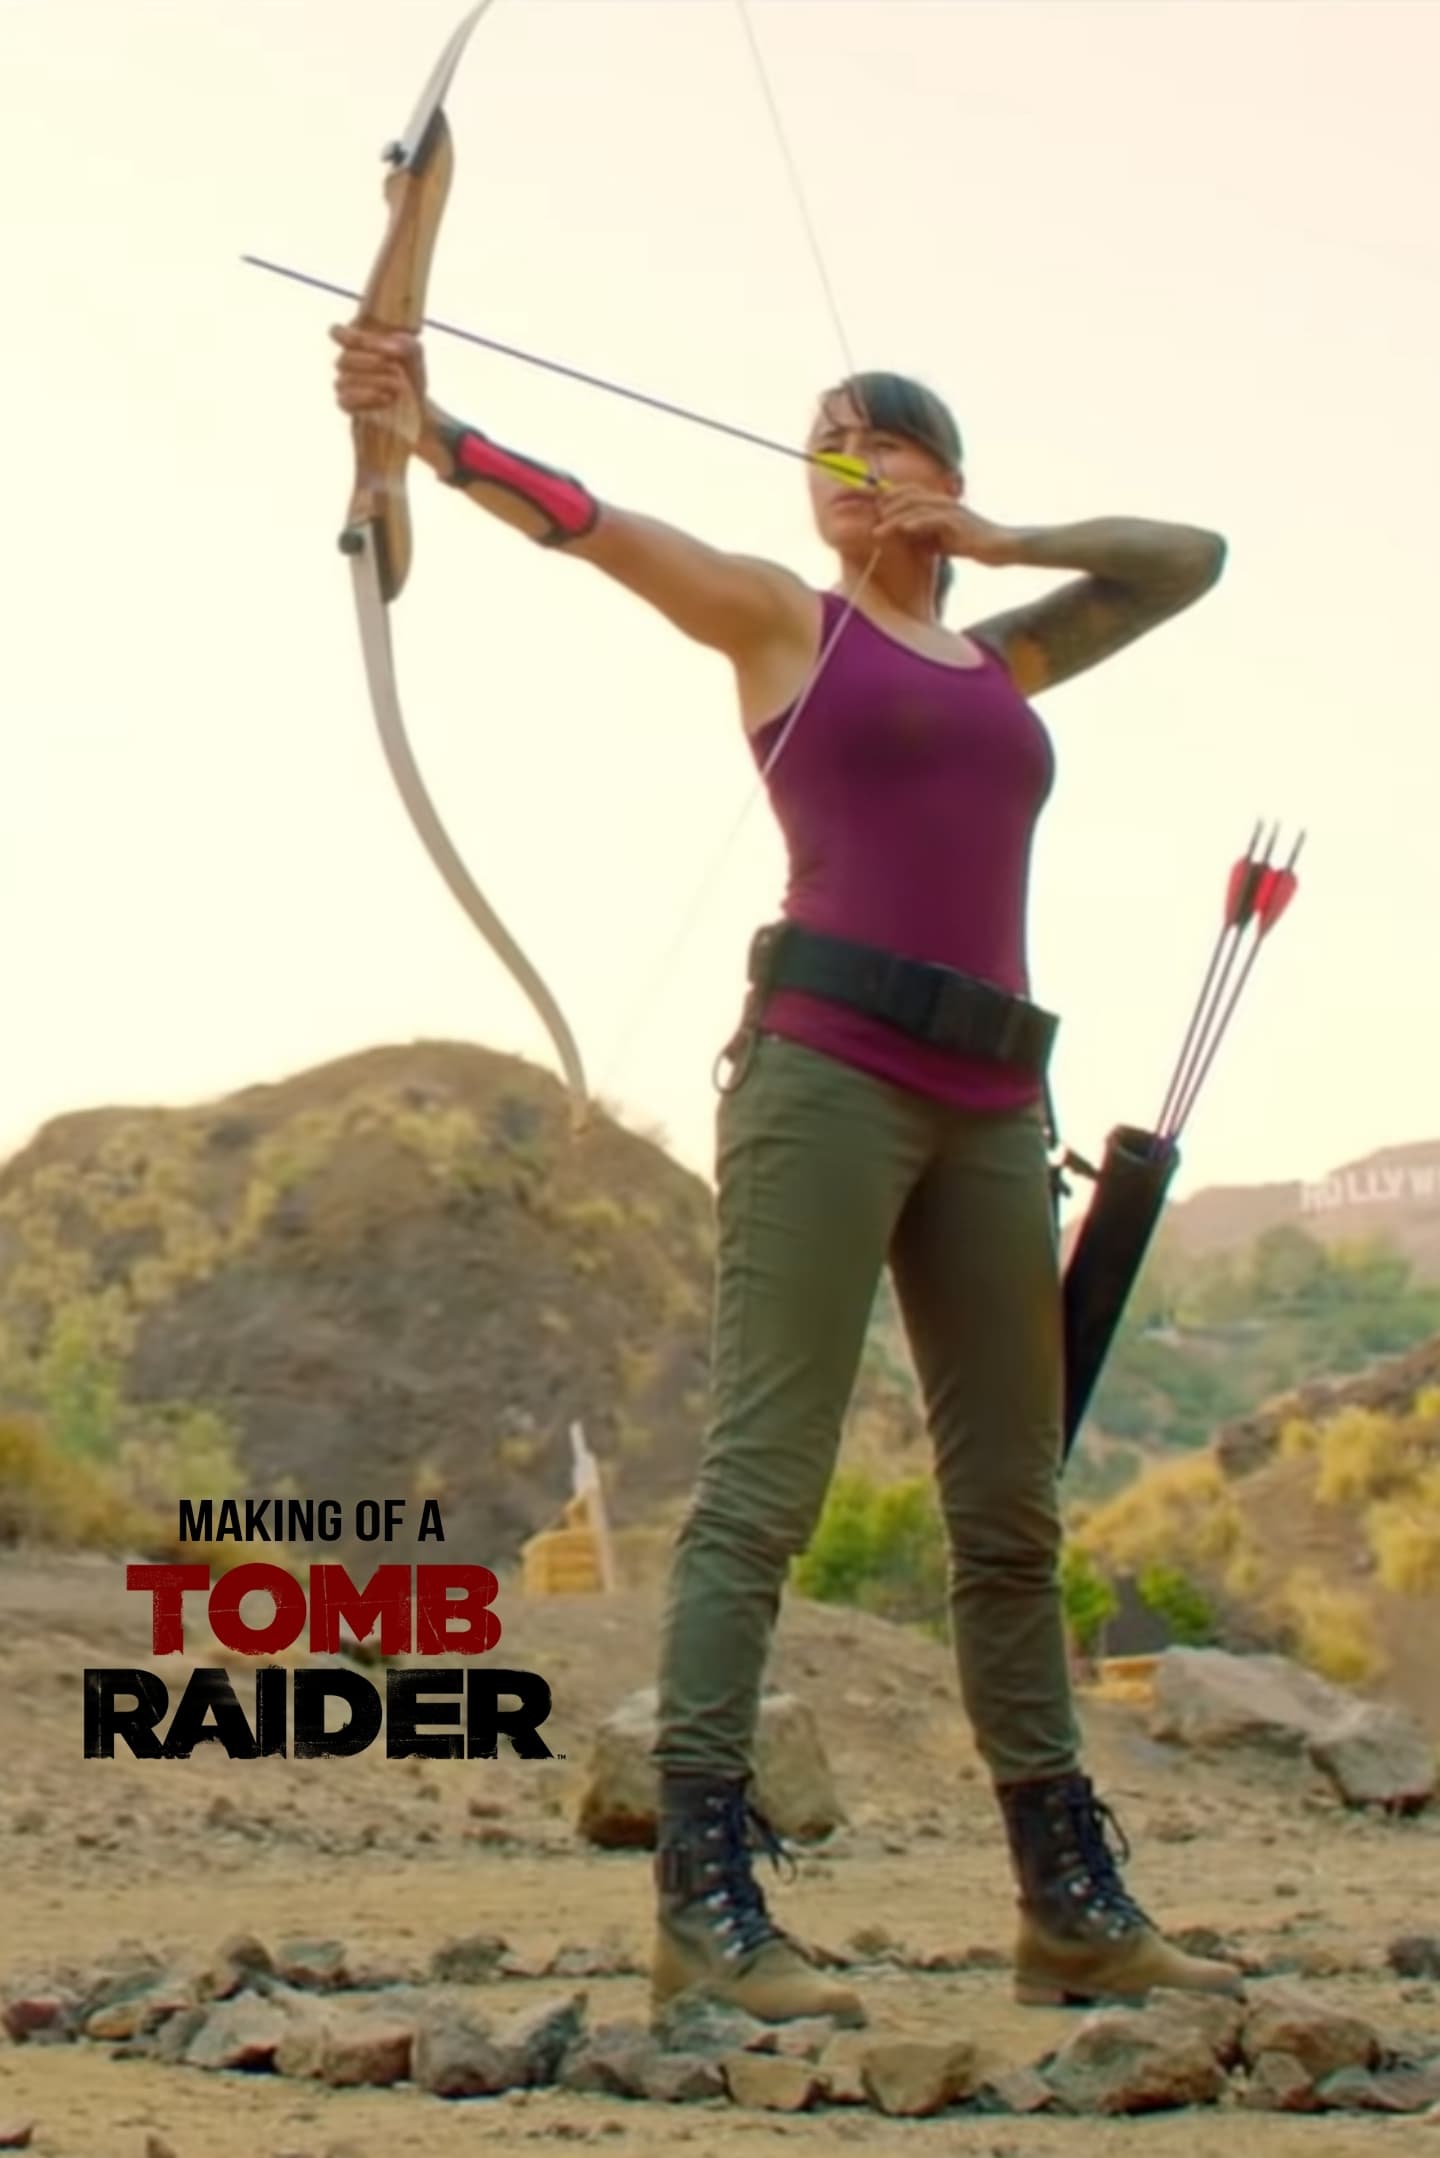 The Making of a Tomb Raider